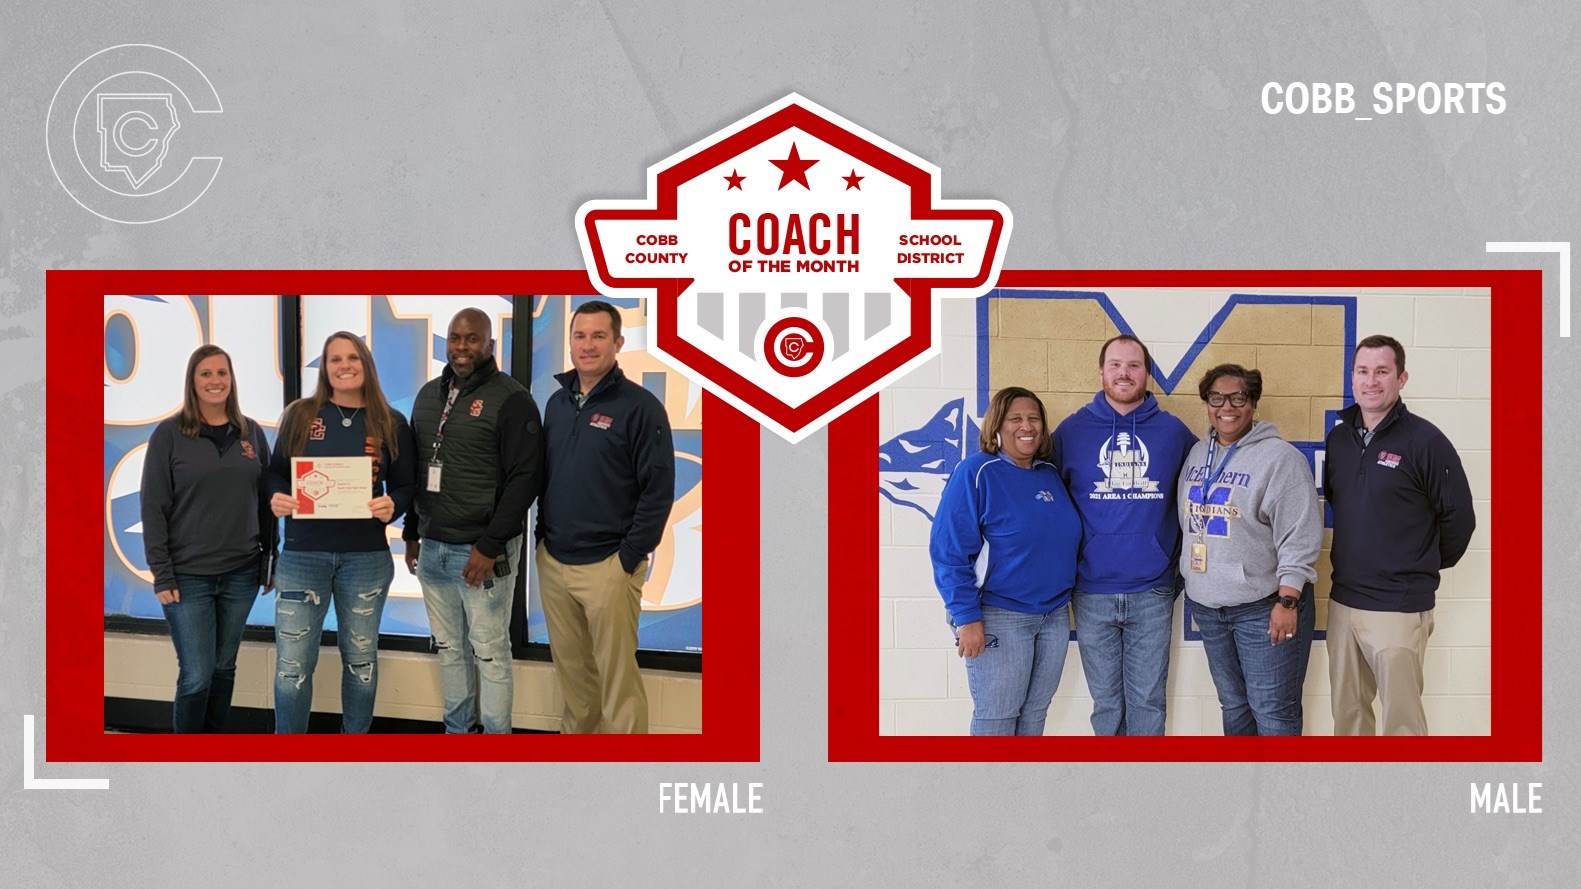 Coaches from McEachern and South Cobb Win Coach of the Month Award